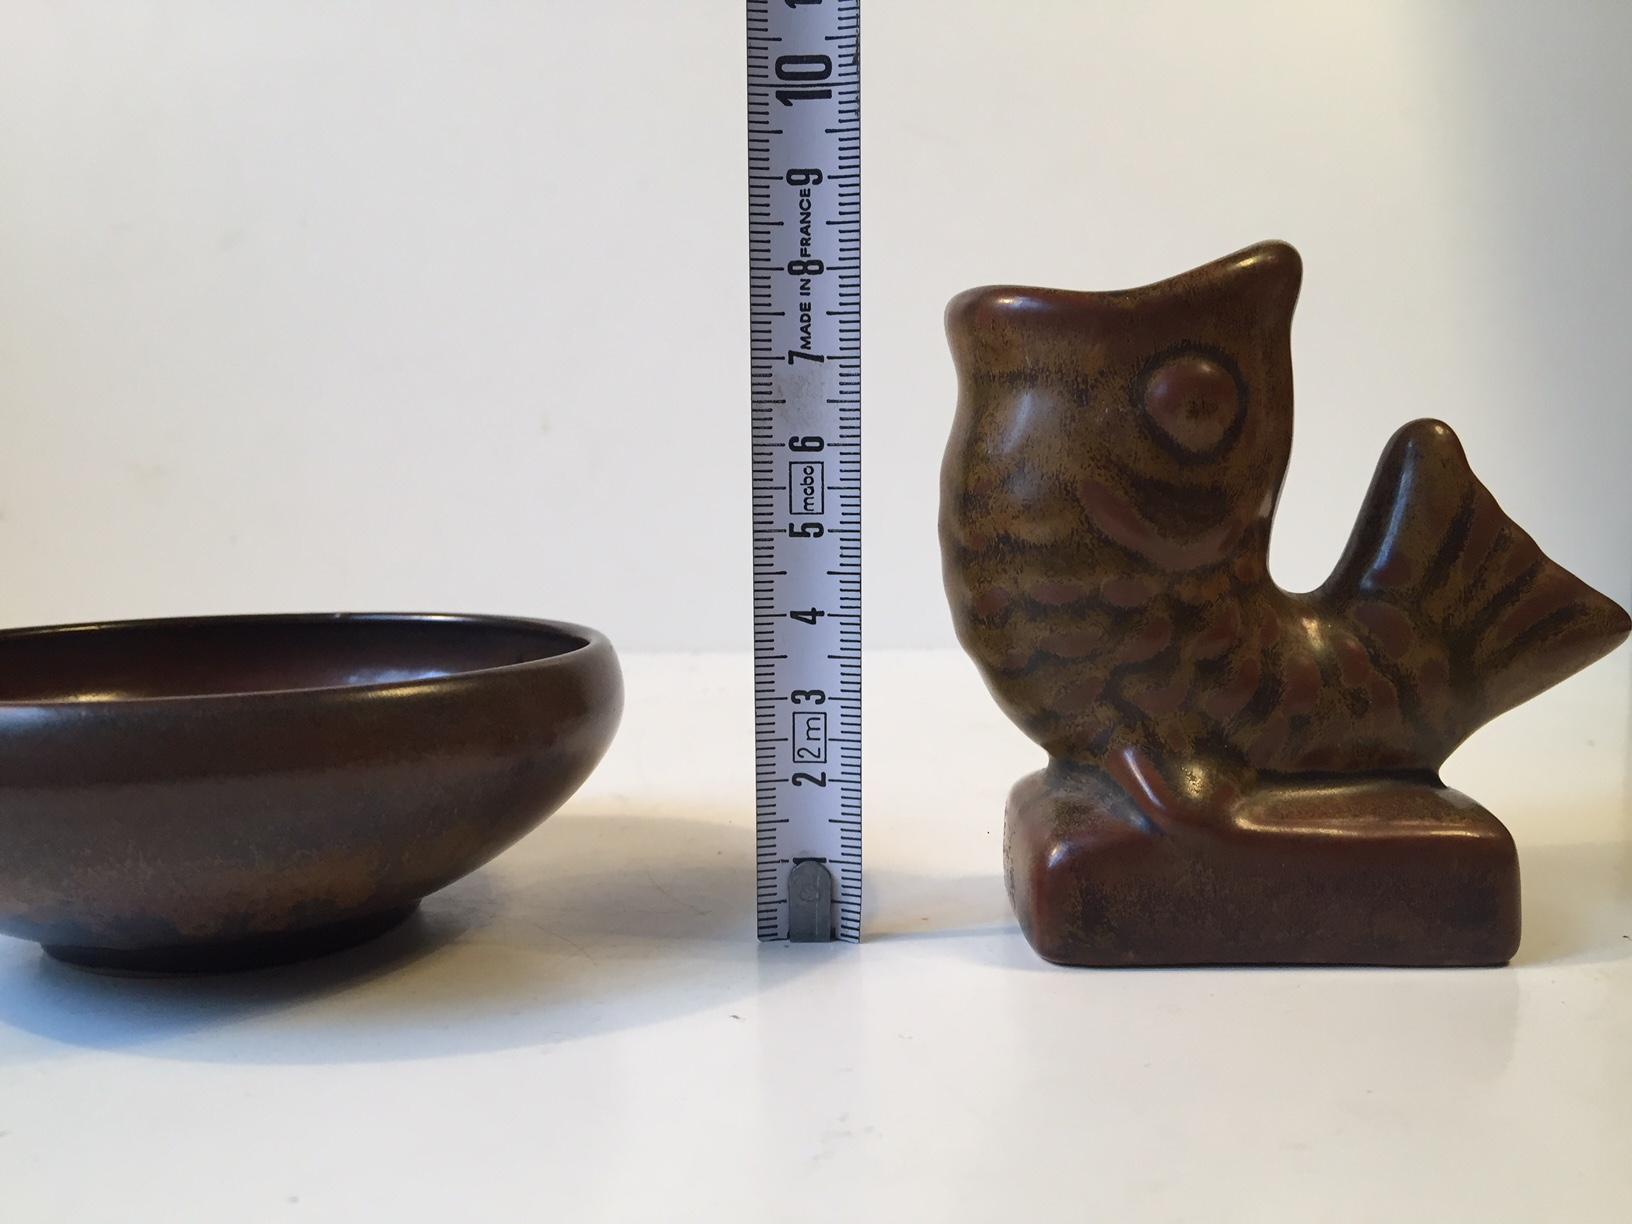 Midcentury Ceramic Fish Vase and Bowl by Laurids Hjorth, Denmark 1950s For Sale 1